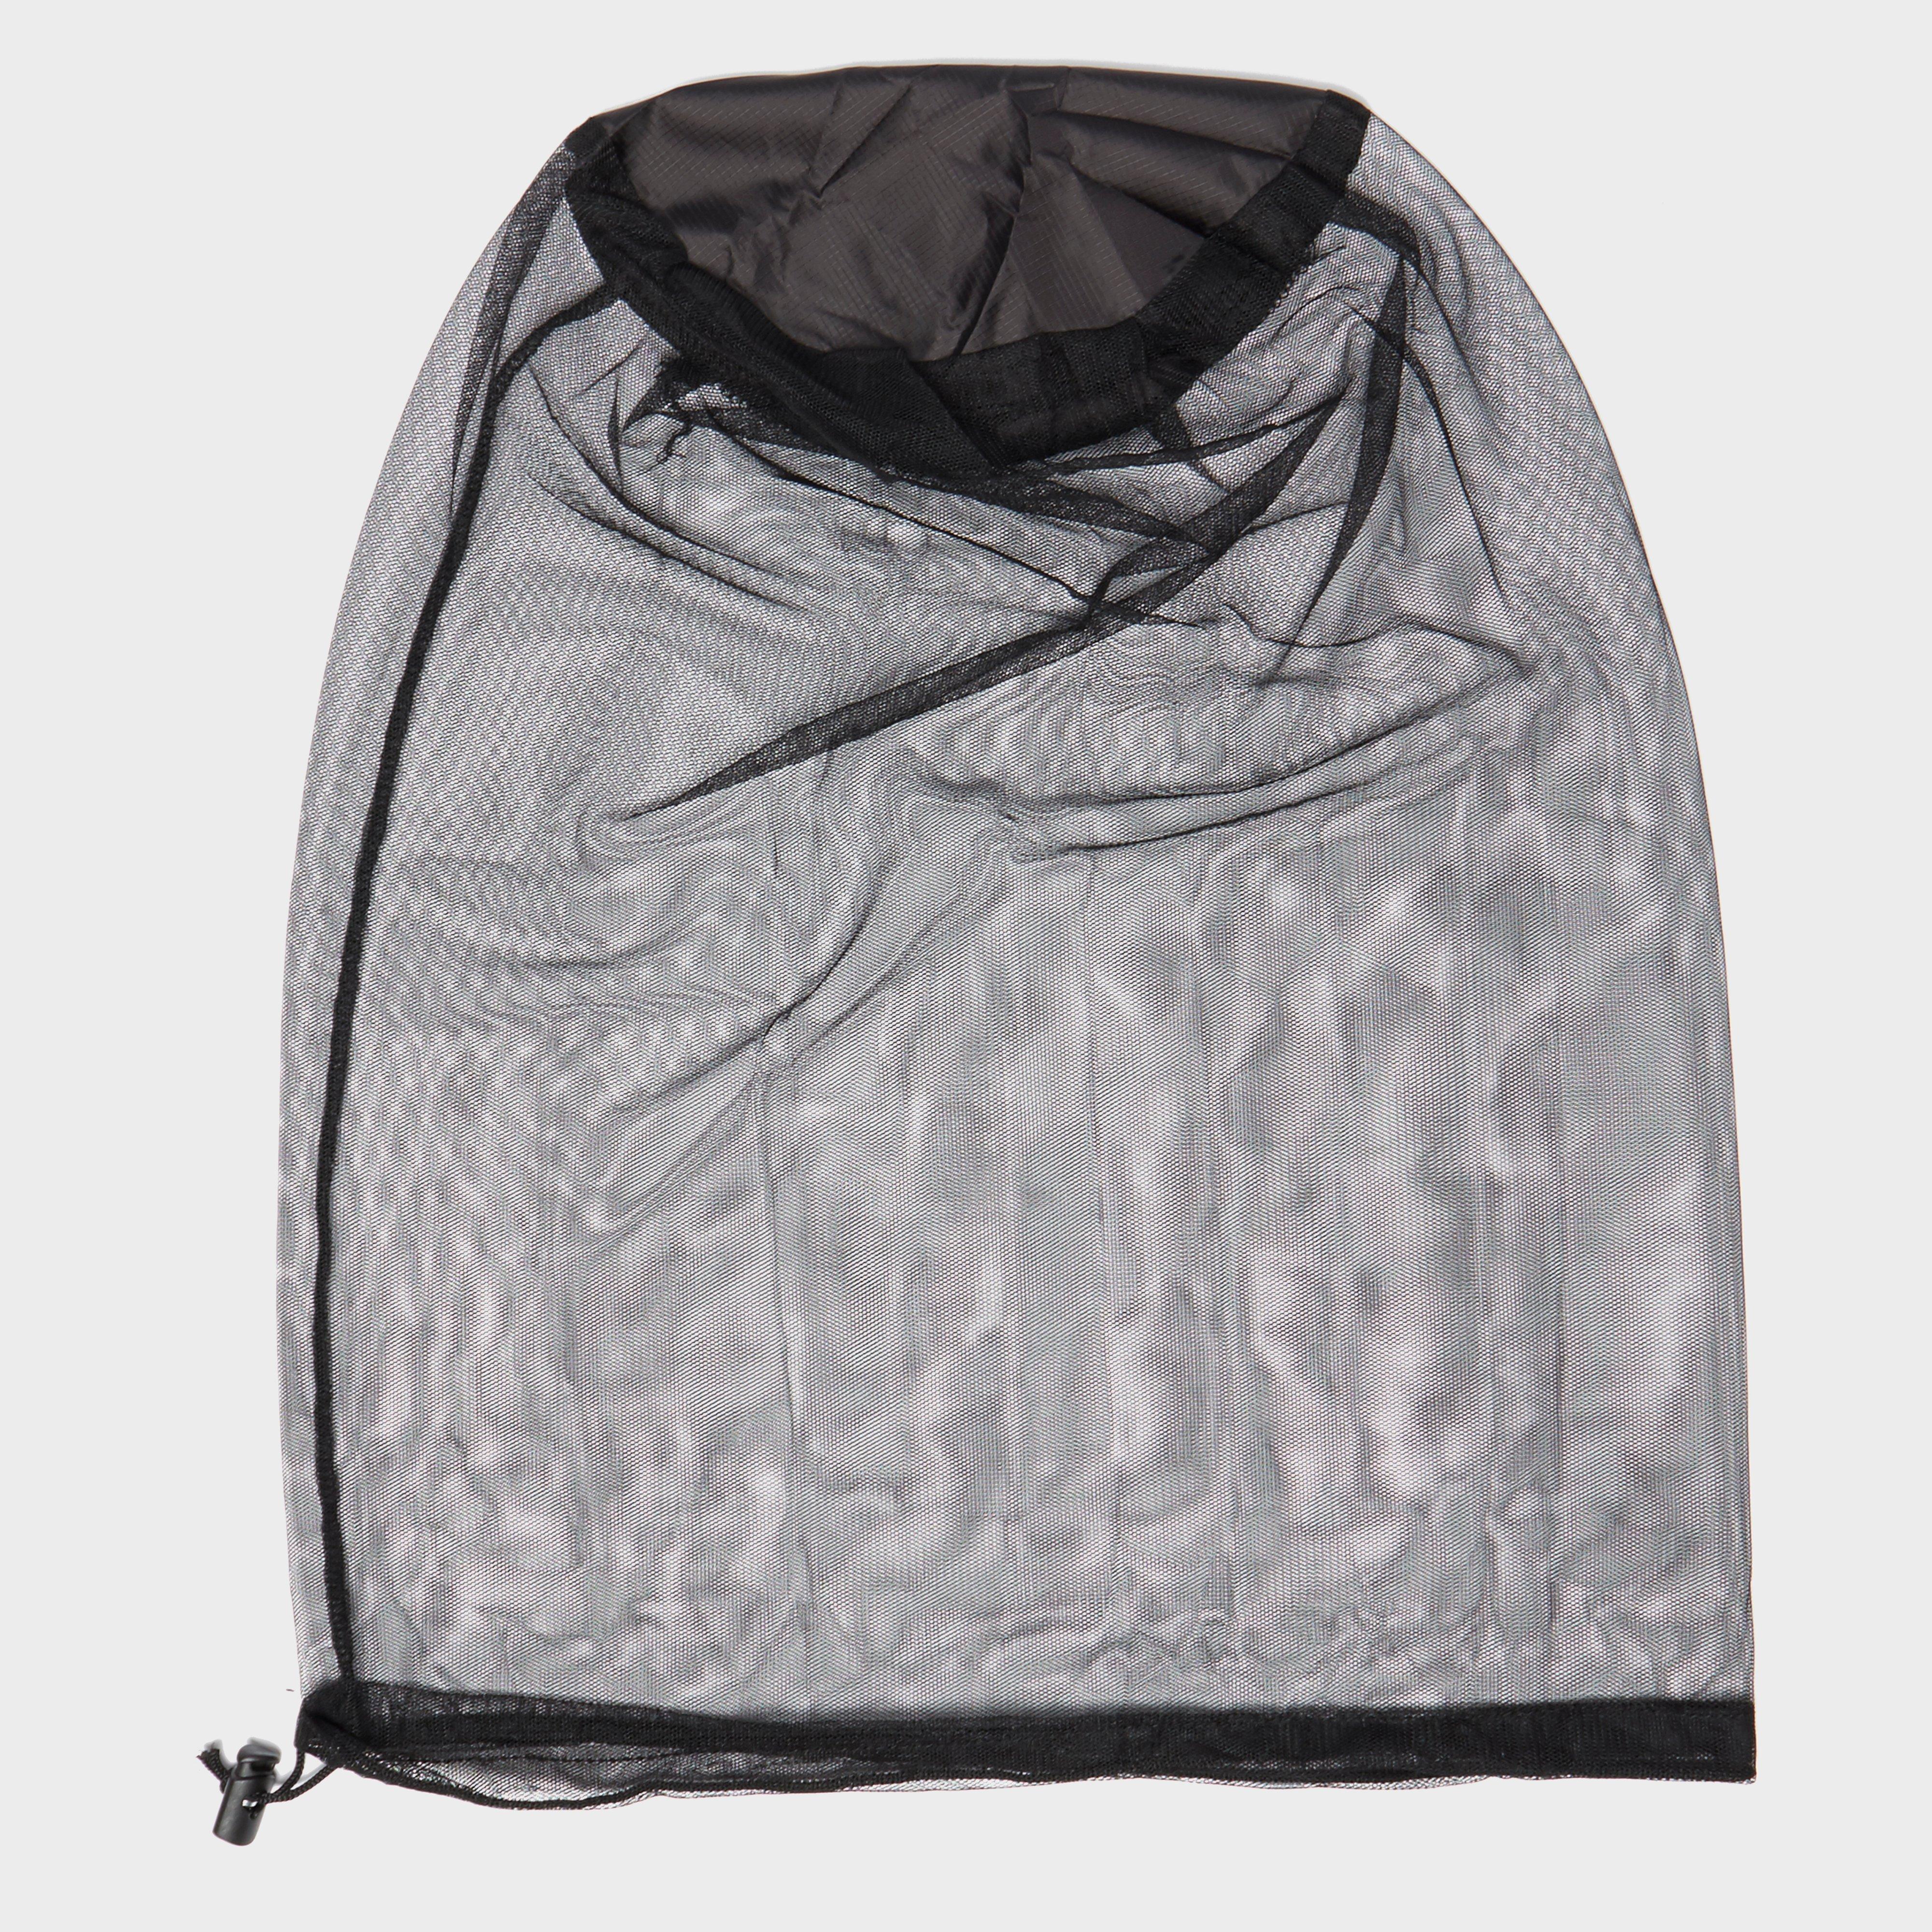 Technicals Mosquito Headnet Review